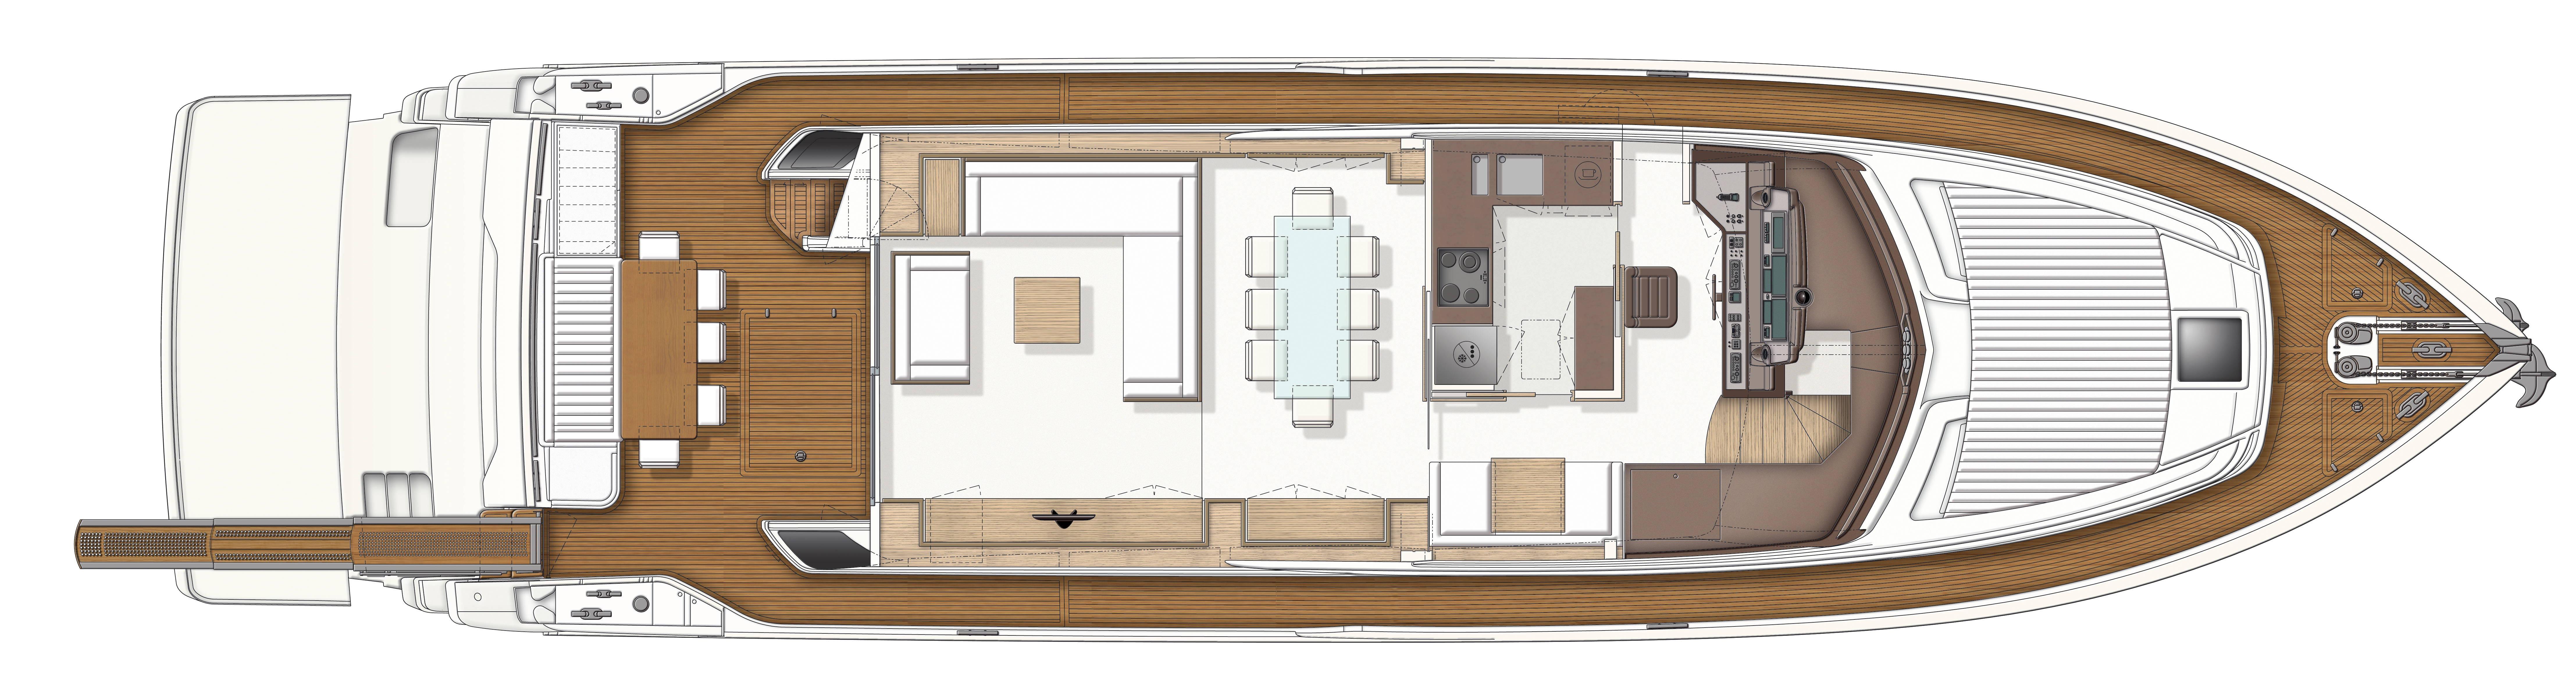 Manufacturer Provided Image: Ferretti 750 Deck Layout Plan